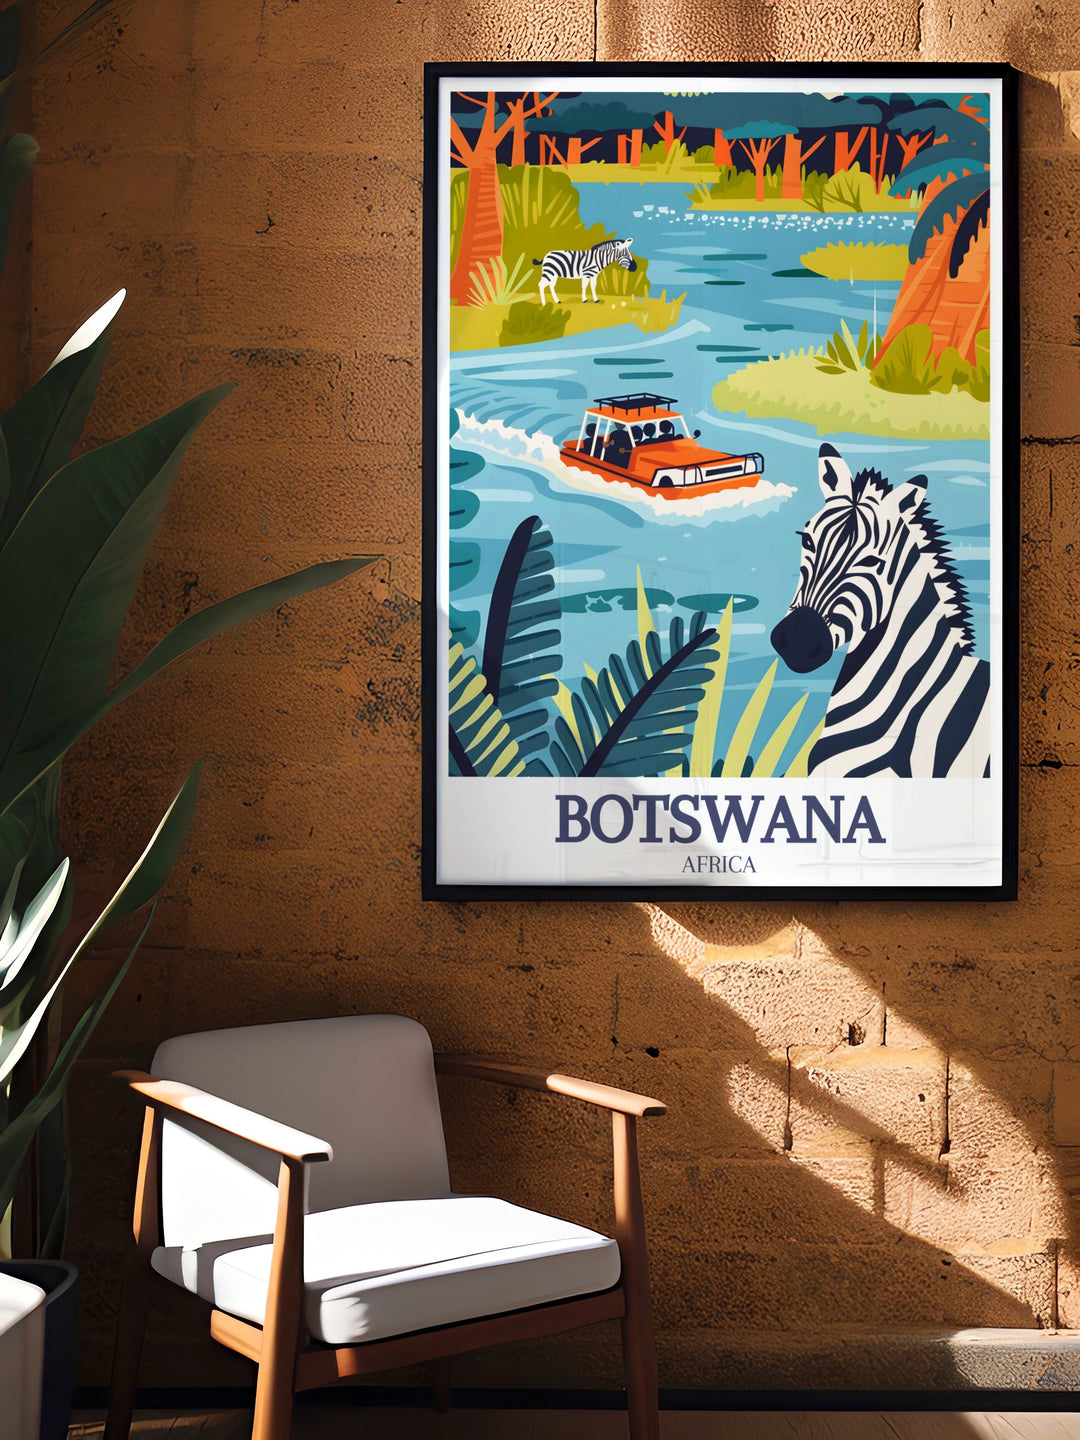 Okavango Delta and Chobe National Park wall art for Botswana travel enthusiasts. Enjoy Botswana artwork that celebrates the majestic elephants and lush landscapes of these renowned regions, perfect for any space in your home.